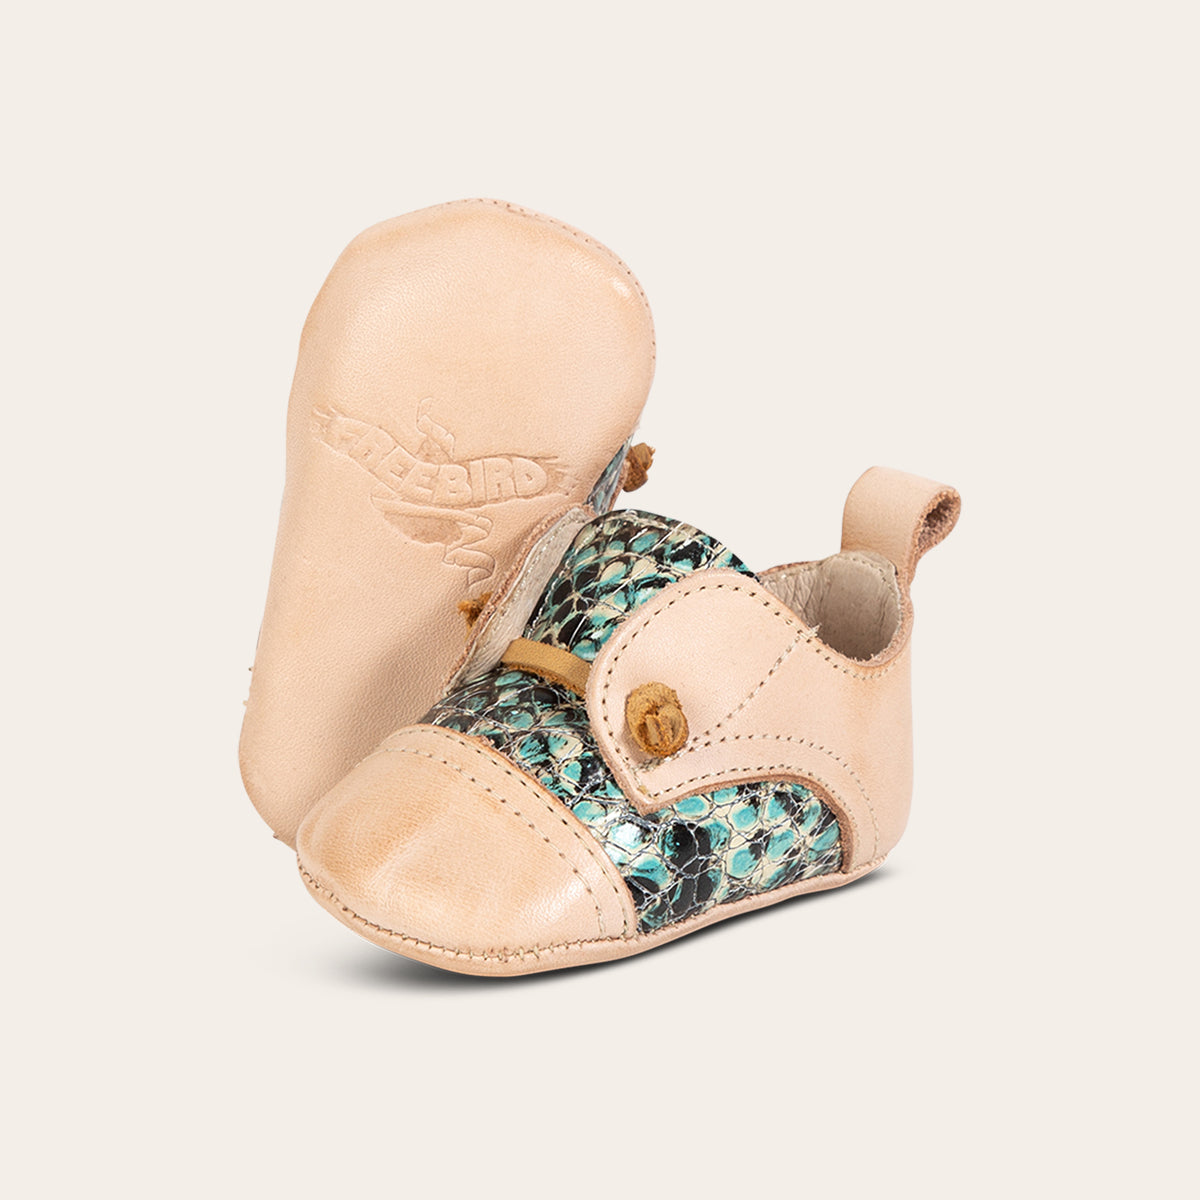 Side view showing decorative knotted leather lace and soft leather imprinted sole on FREEBIRD infant baby Mabel turquoise croco leather shoe